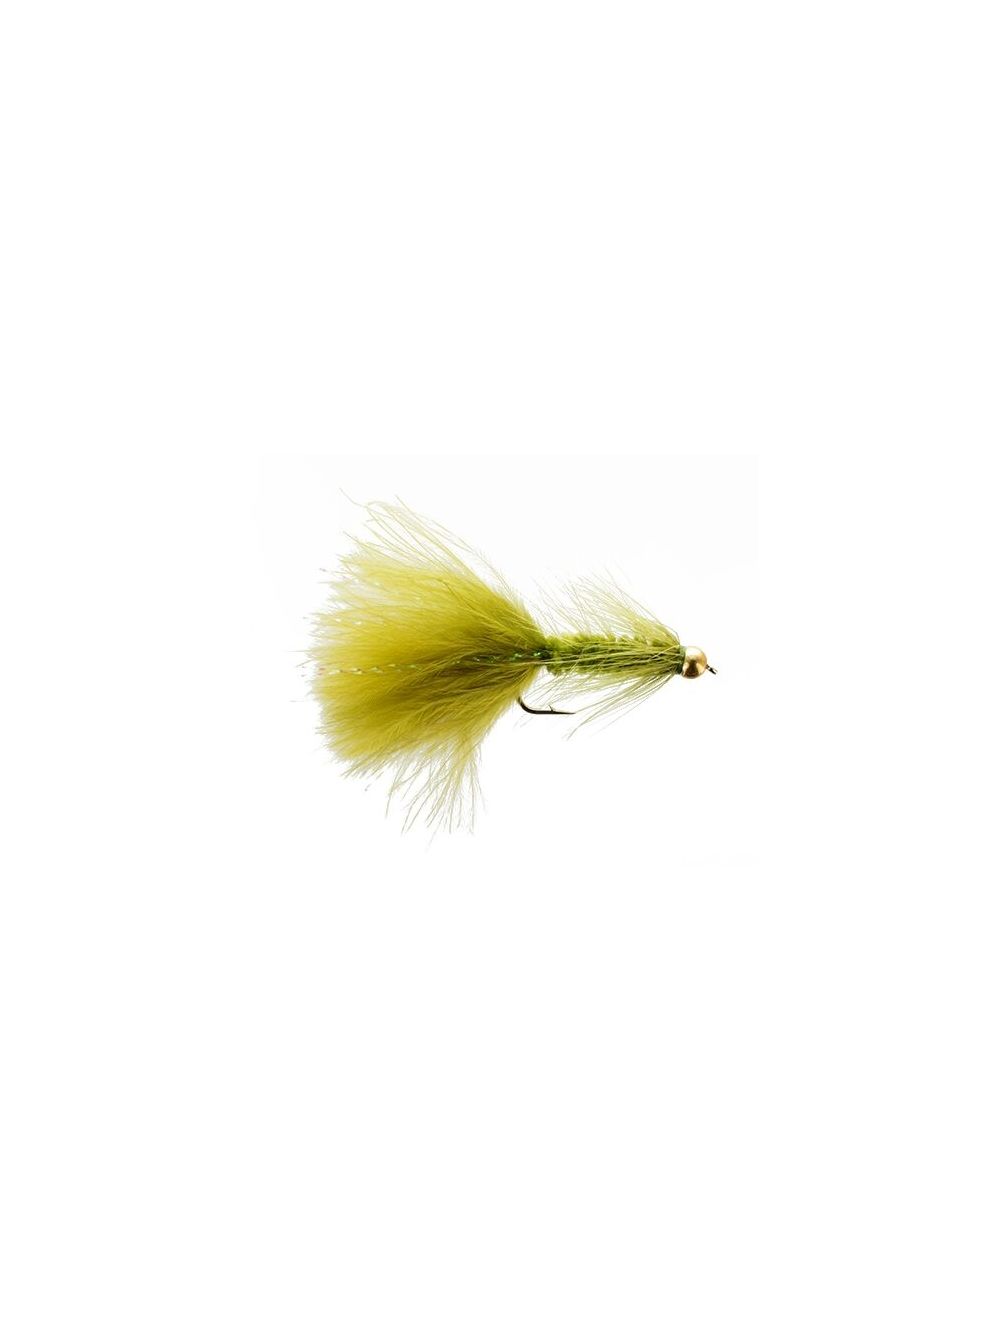 Conehead Woolly Bugger Olive S6 Fishing Fly, Streamers